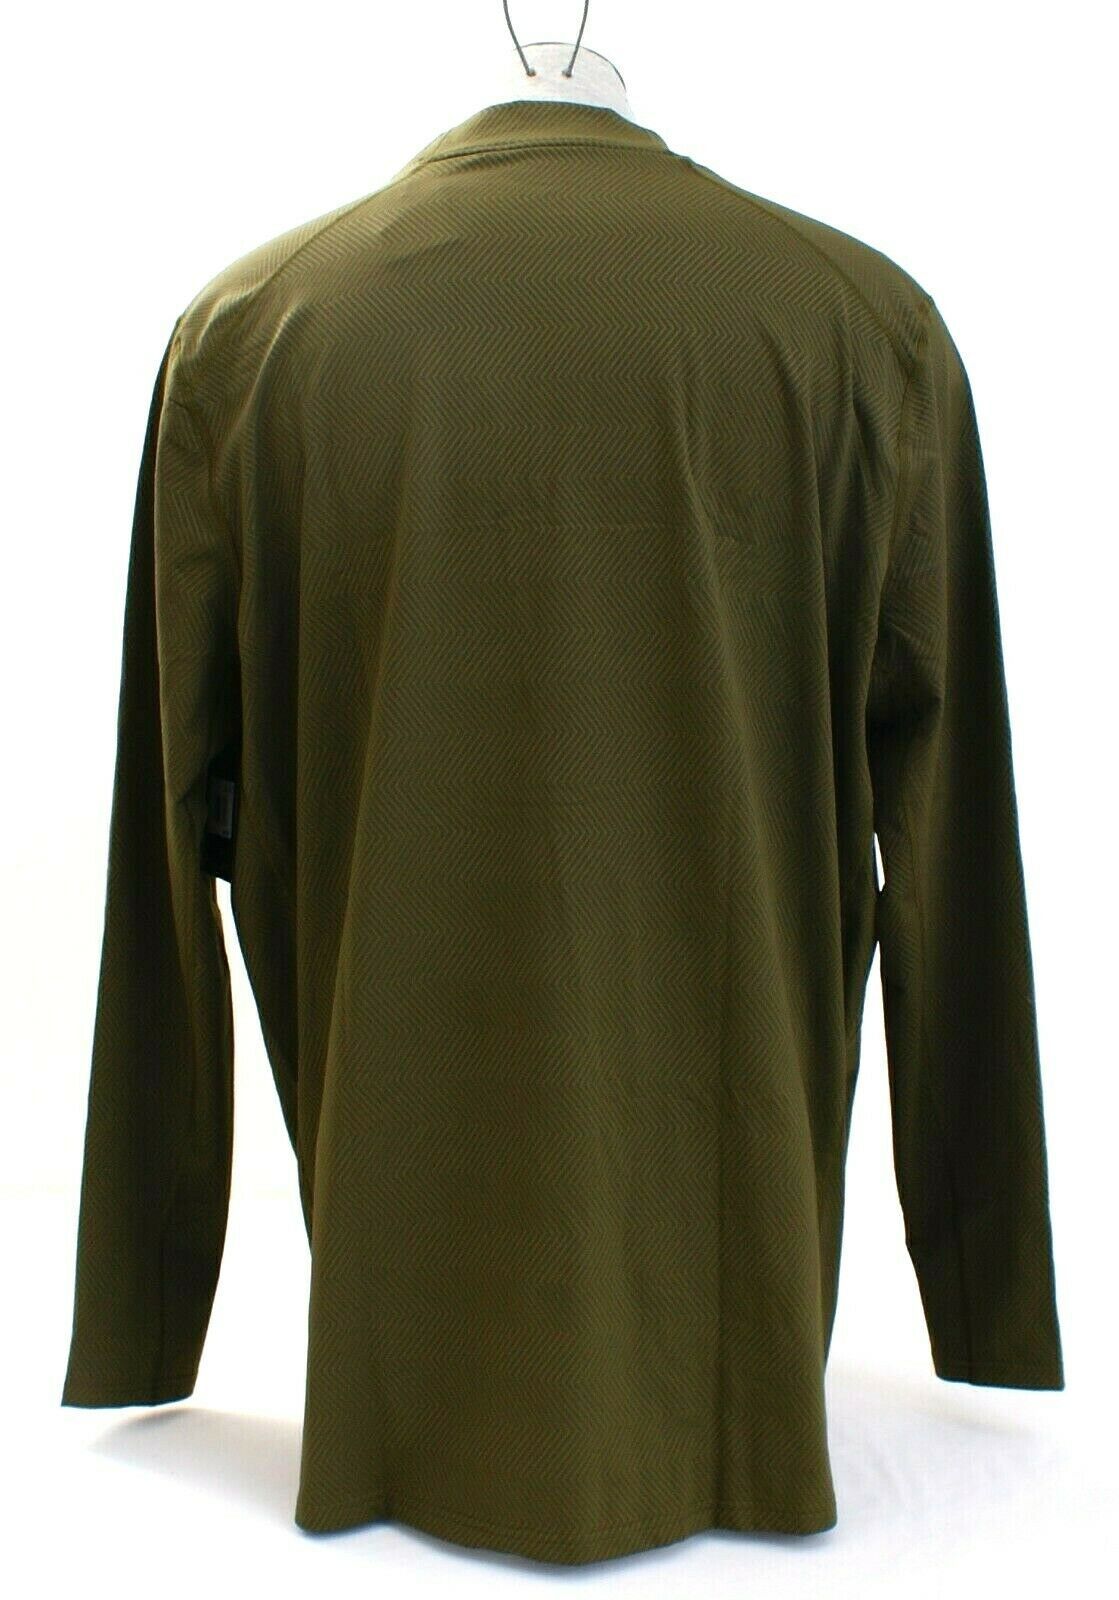 Nike Dry Fit Olive Green Therma Long Sleeve Base Layer Top Shirt Men's ...